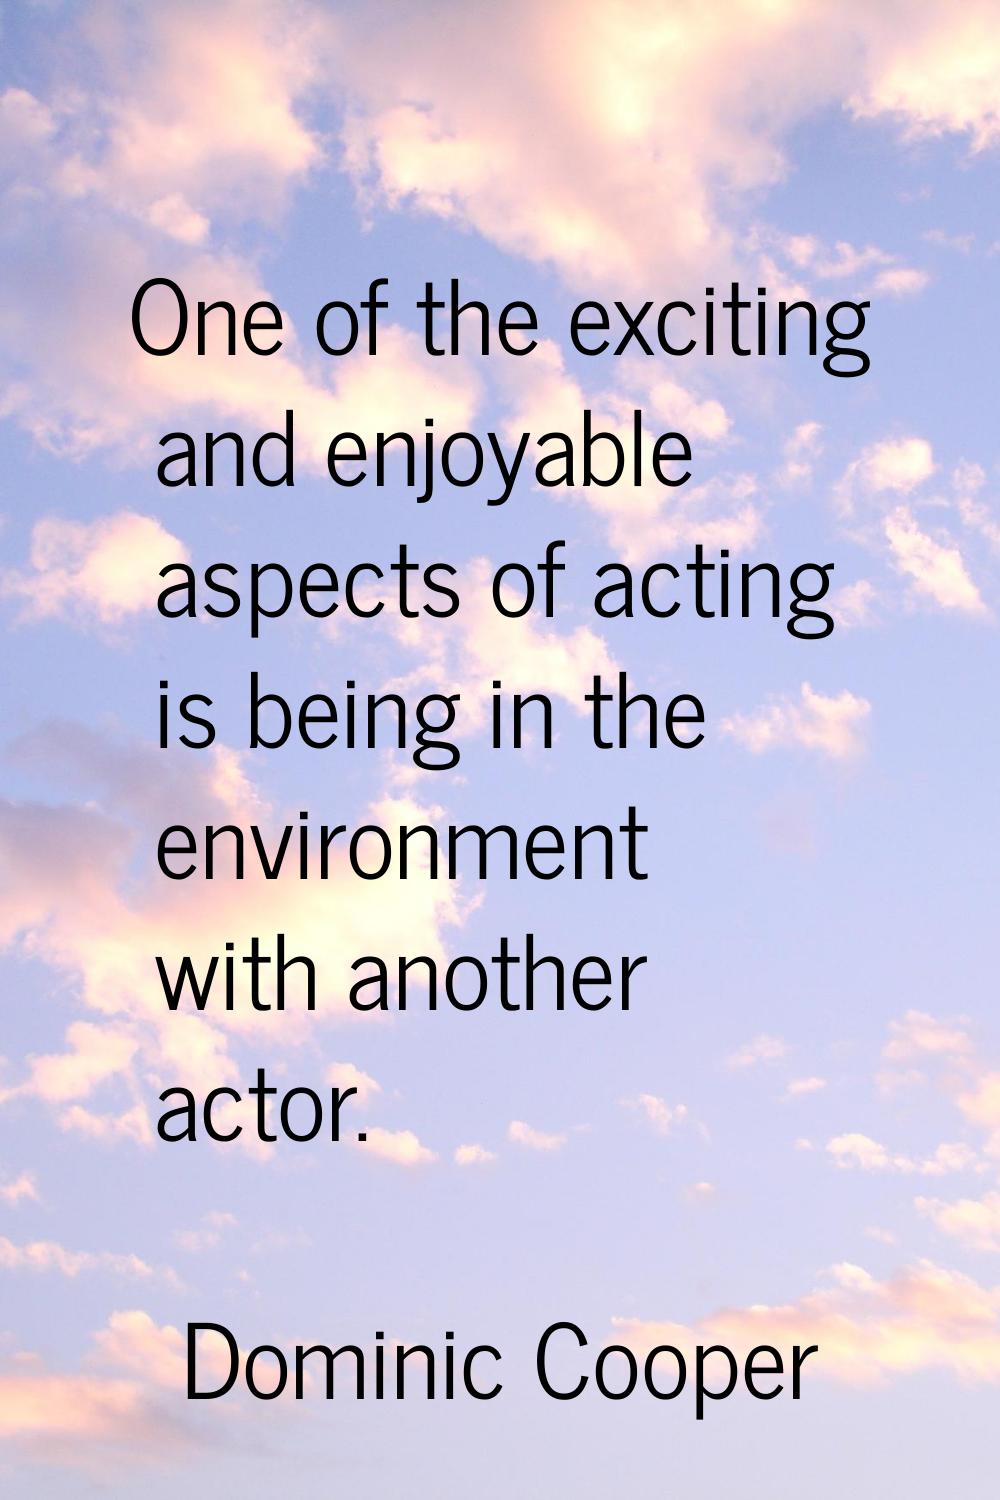 One of the exciting and enjoyable aspects of acting is being in the environment with another actor.